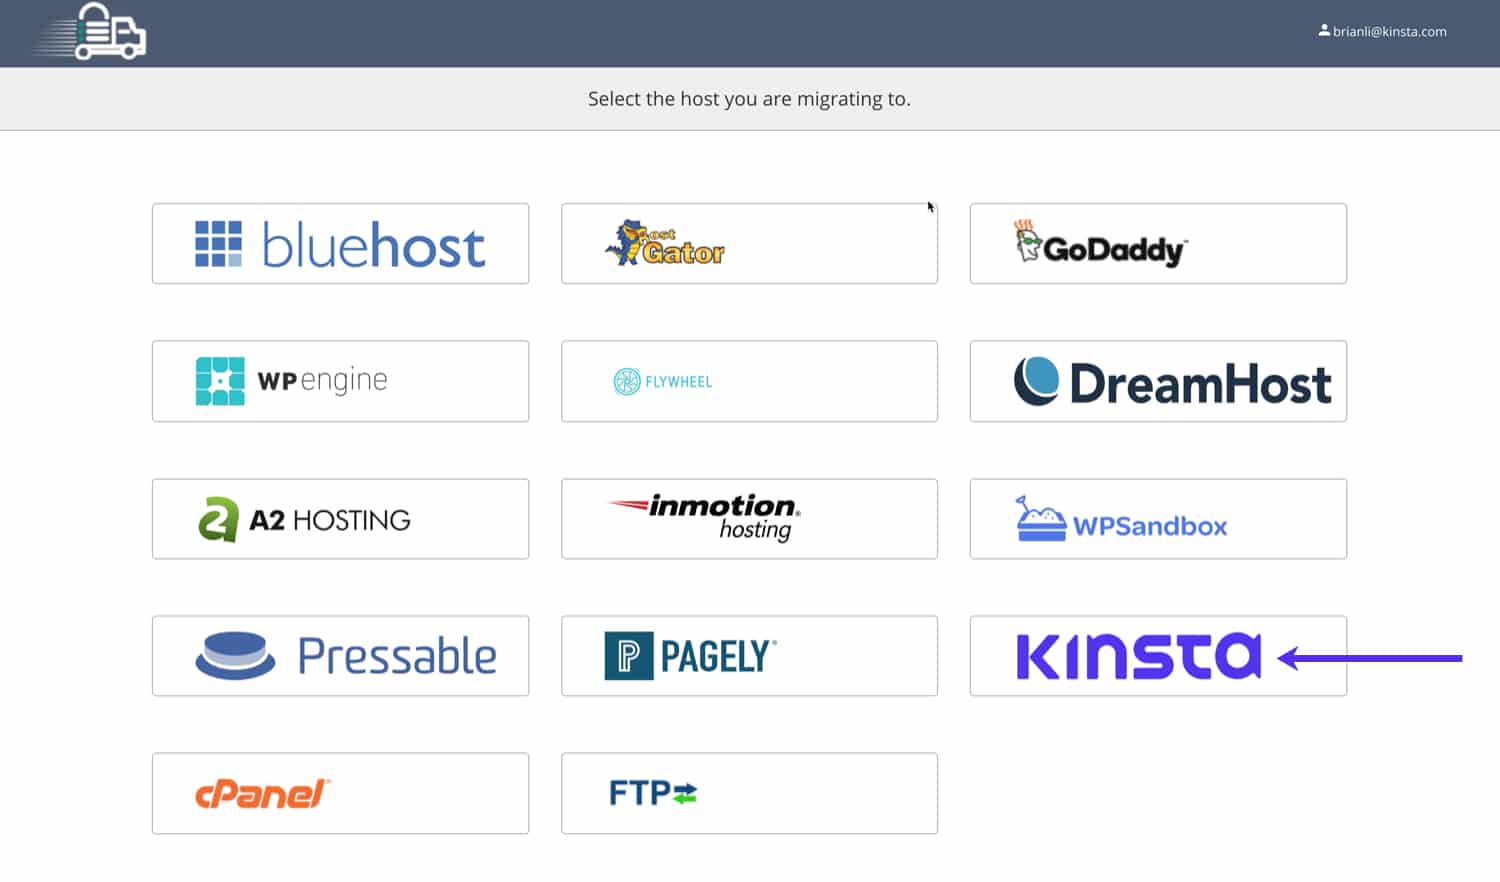 Select Kinsta as the host you are migrating to.